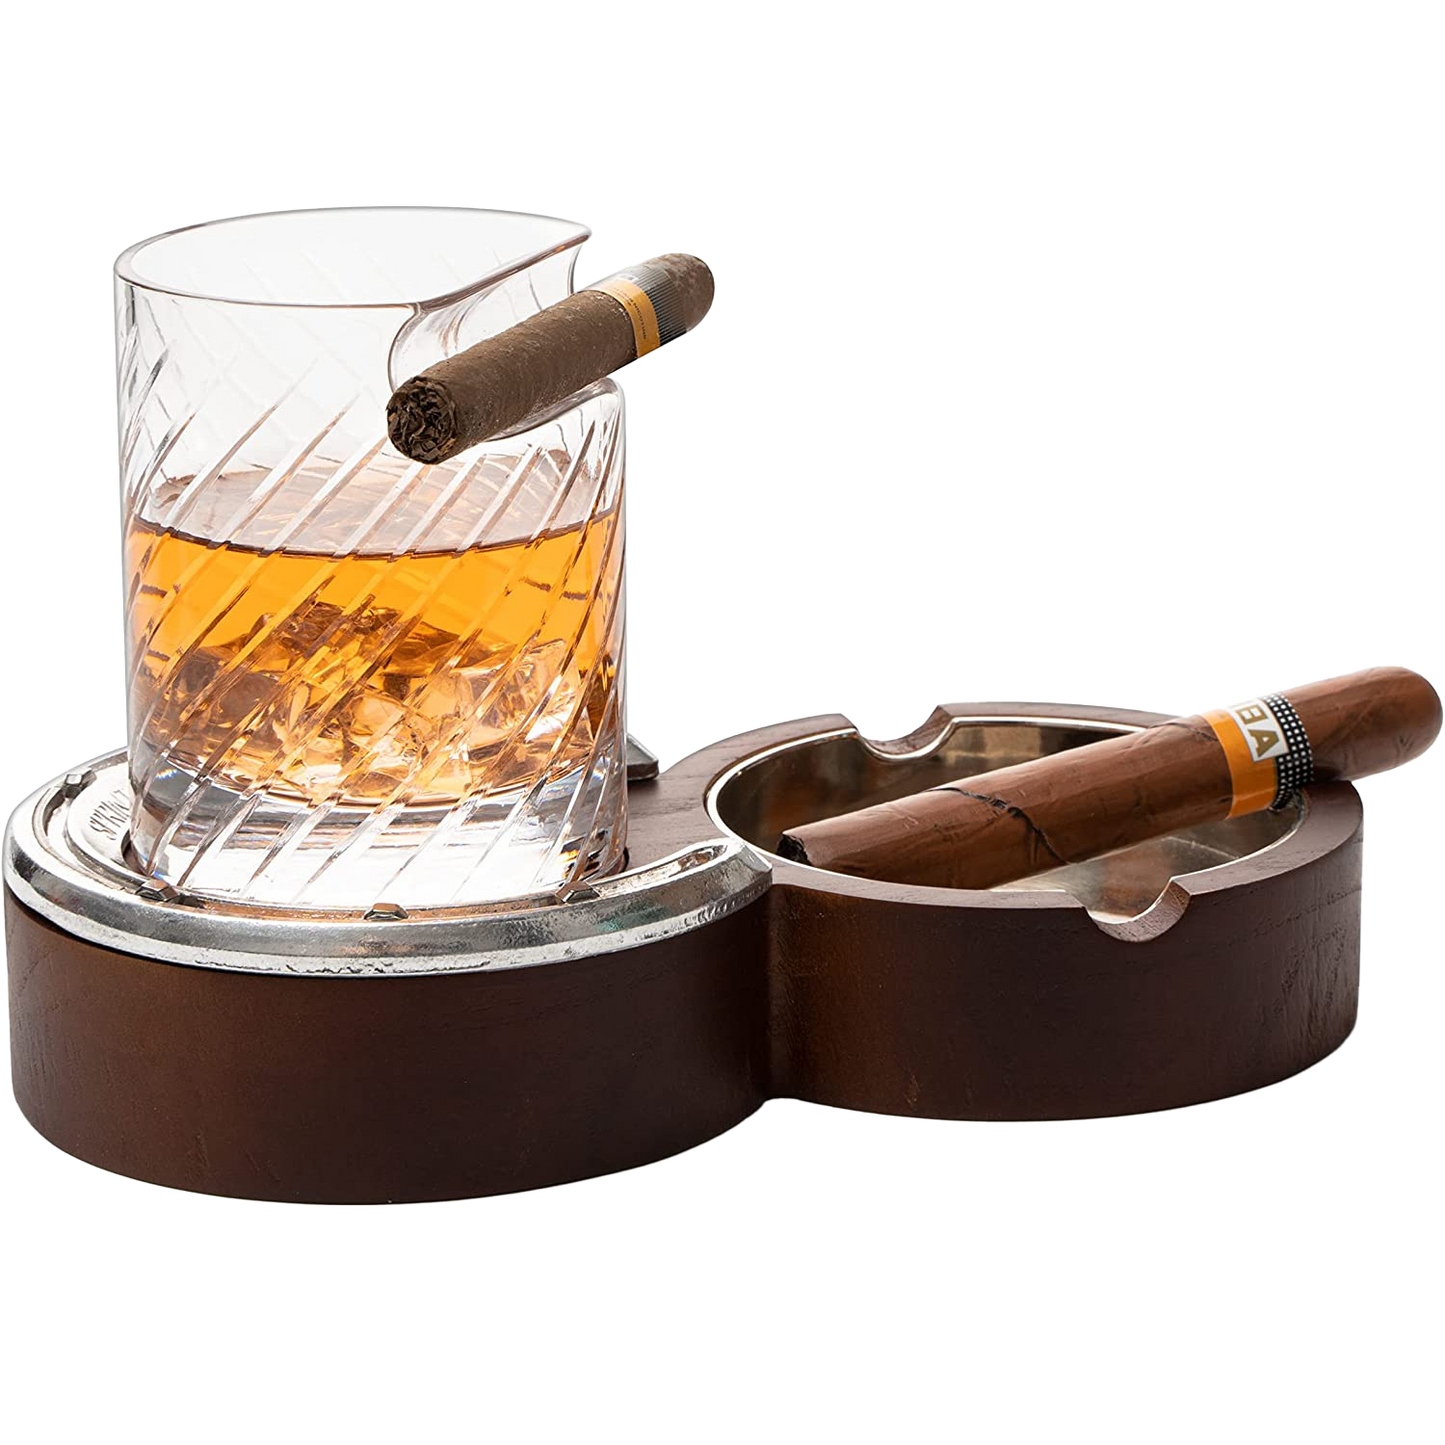 The Wine Savant Luxurious Cigar Glass - In A Leather Horseshoe Storage Case Whiskey Glassware with Cigar Holder - 10oz Cigar Holder Whiskey, Ash Tray - Dad, Men Home Office, Leather Gifts-0